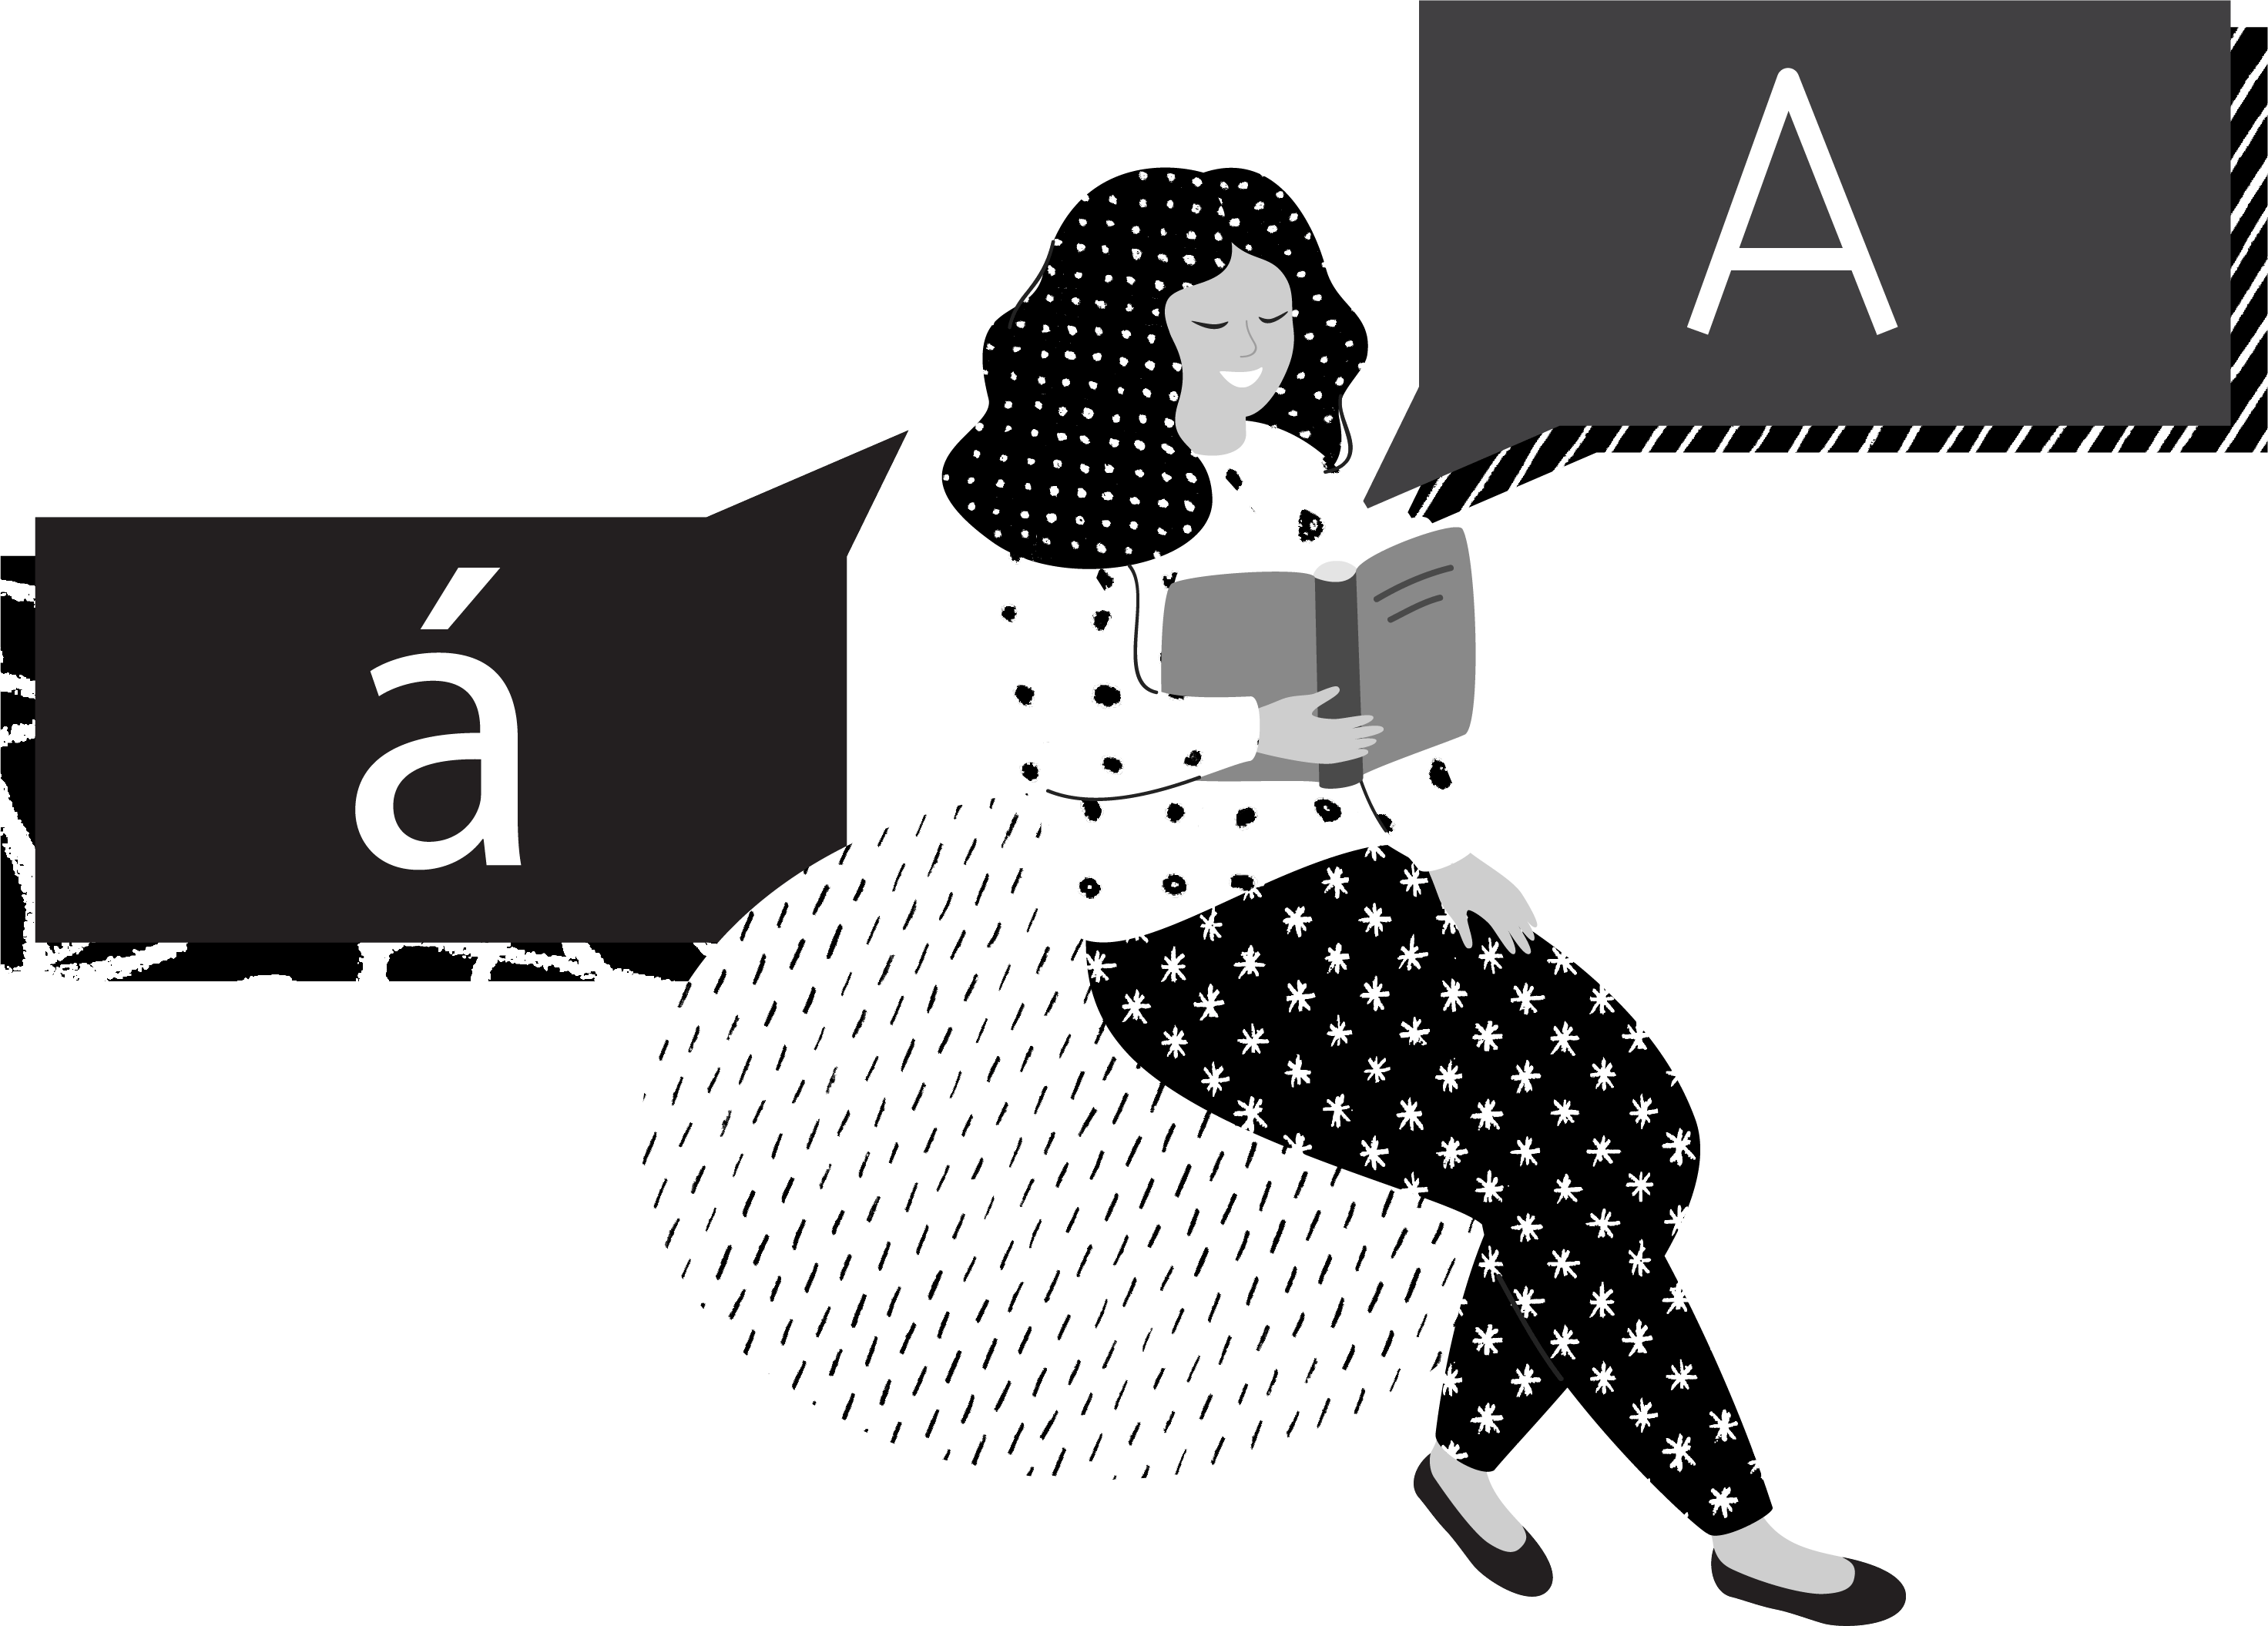 girl with two speech bubbles, one an 'A', the other an accented 'a'.